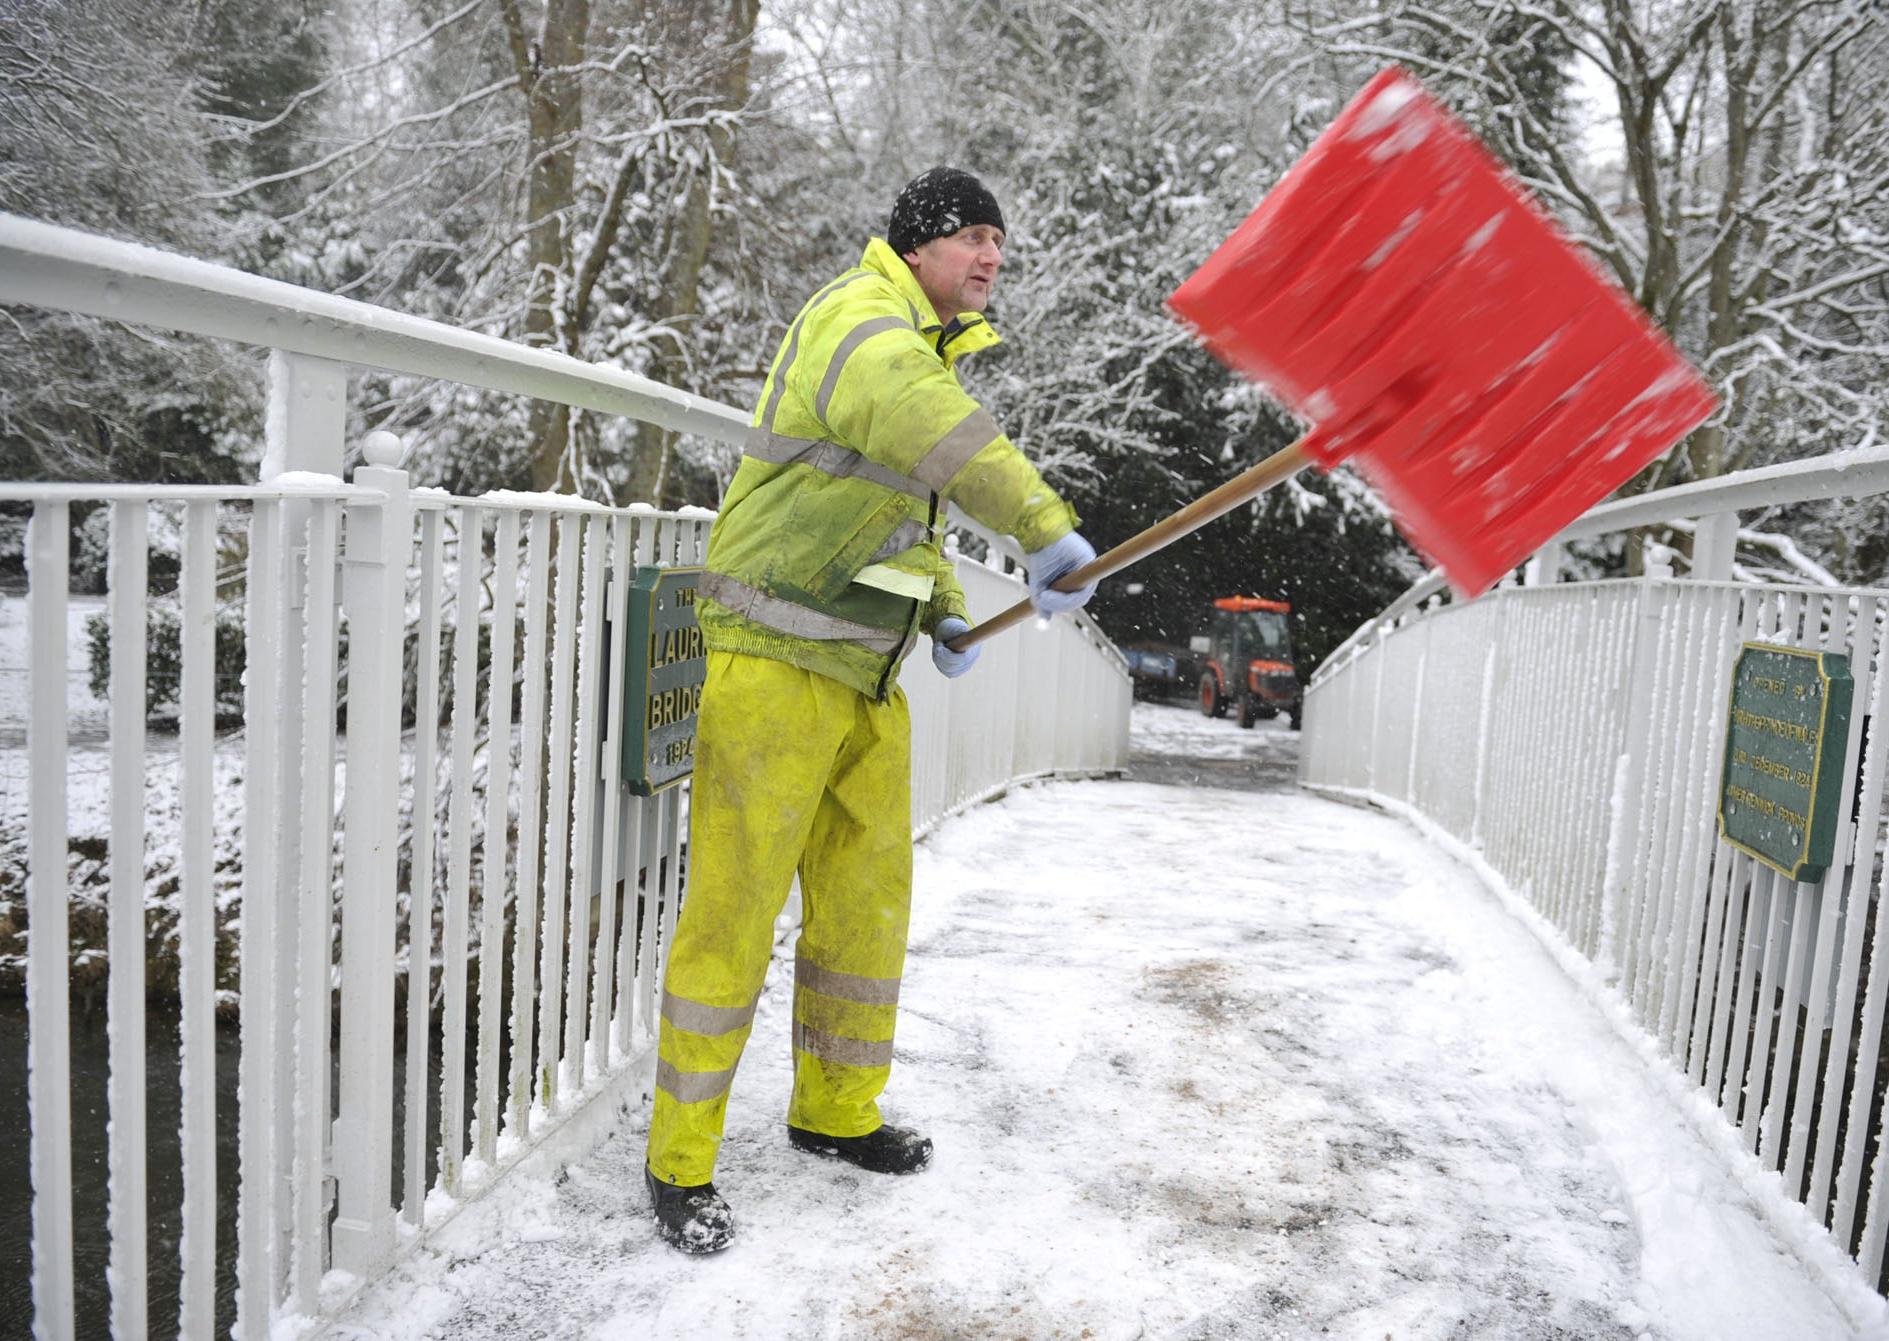 Park worker on The Laurie Bridge in Wilton Park Lodge, Hawick clearing the snow.